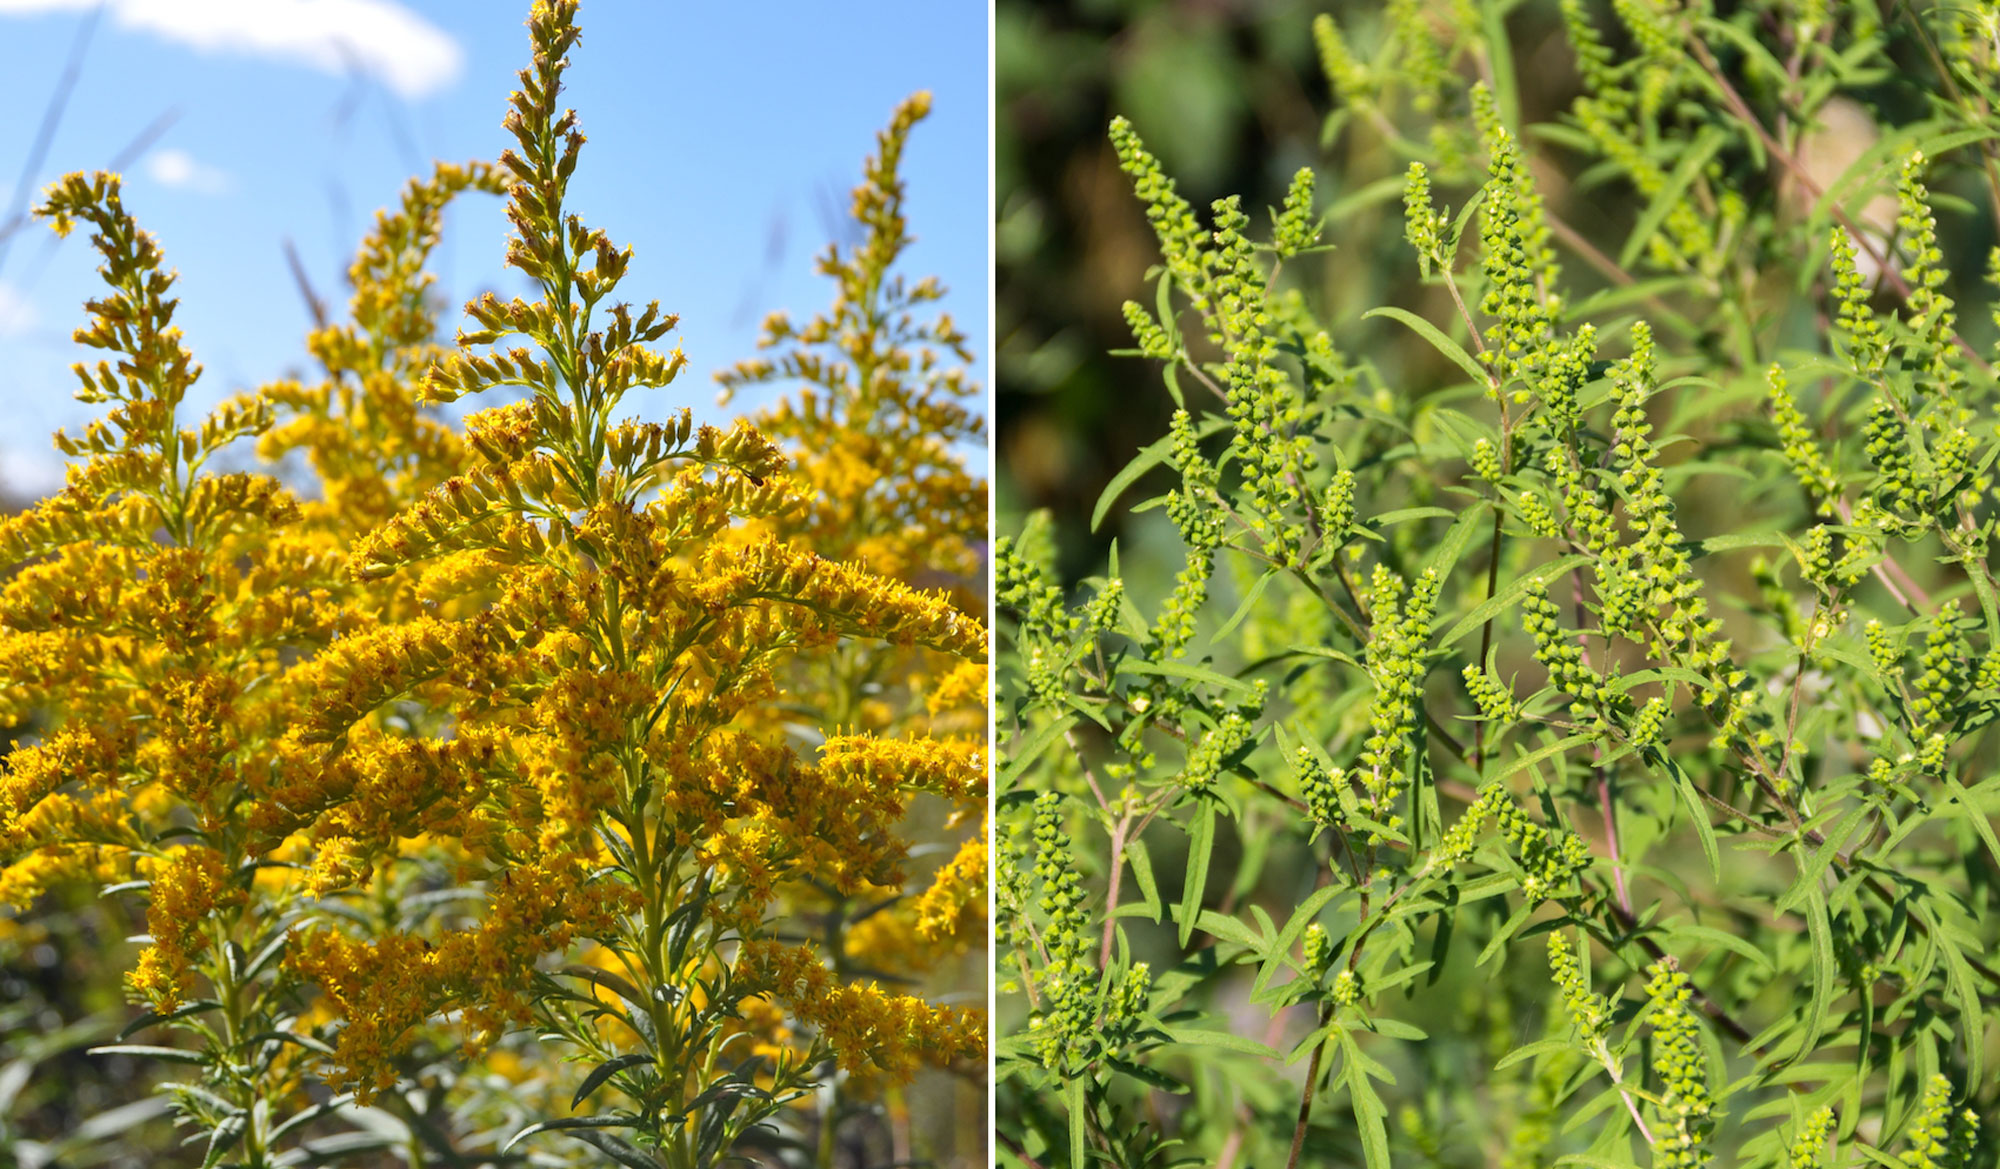 Goldenrod and ragweed side by side.